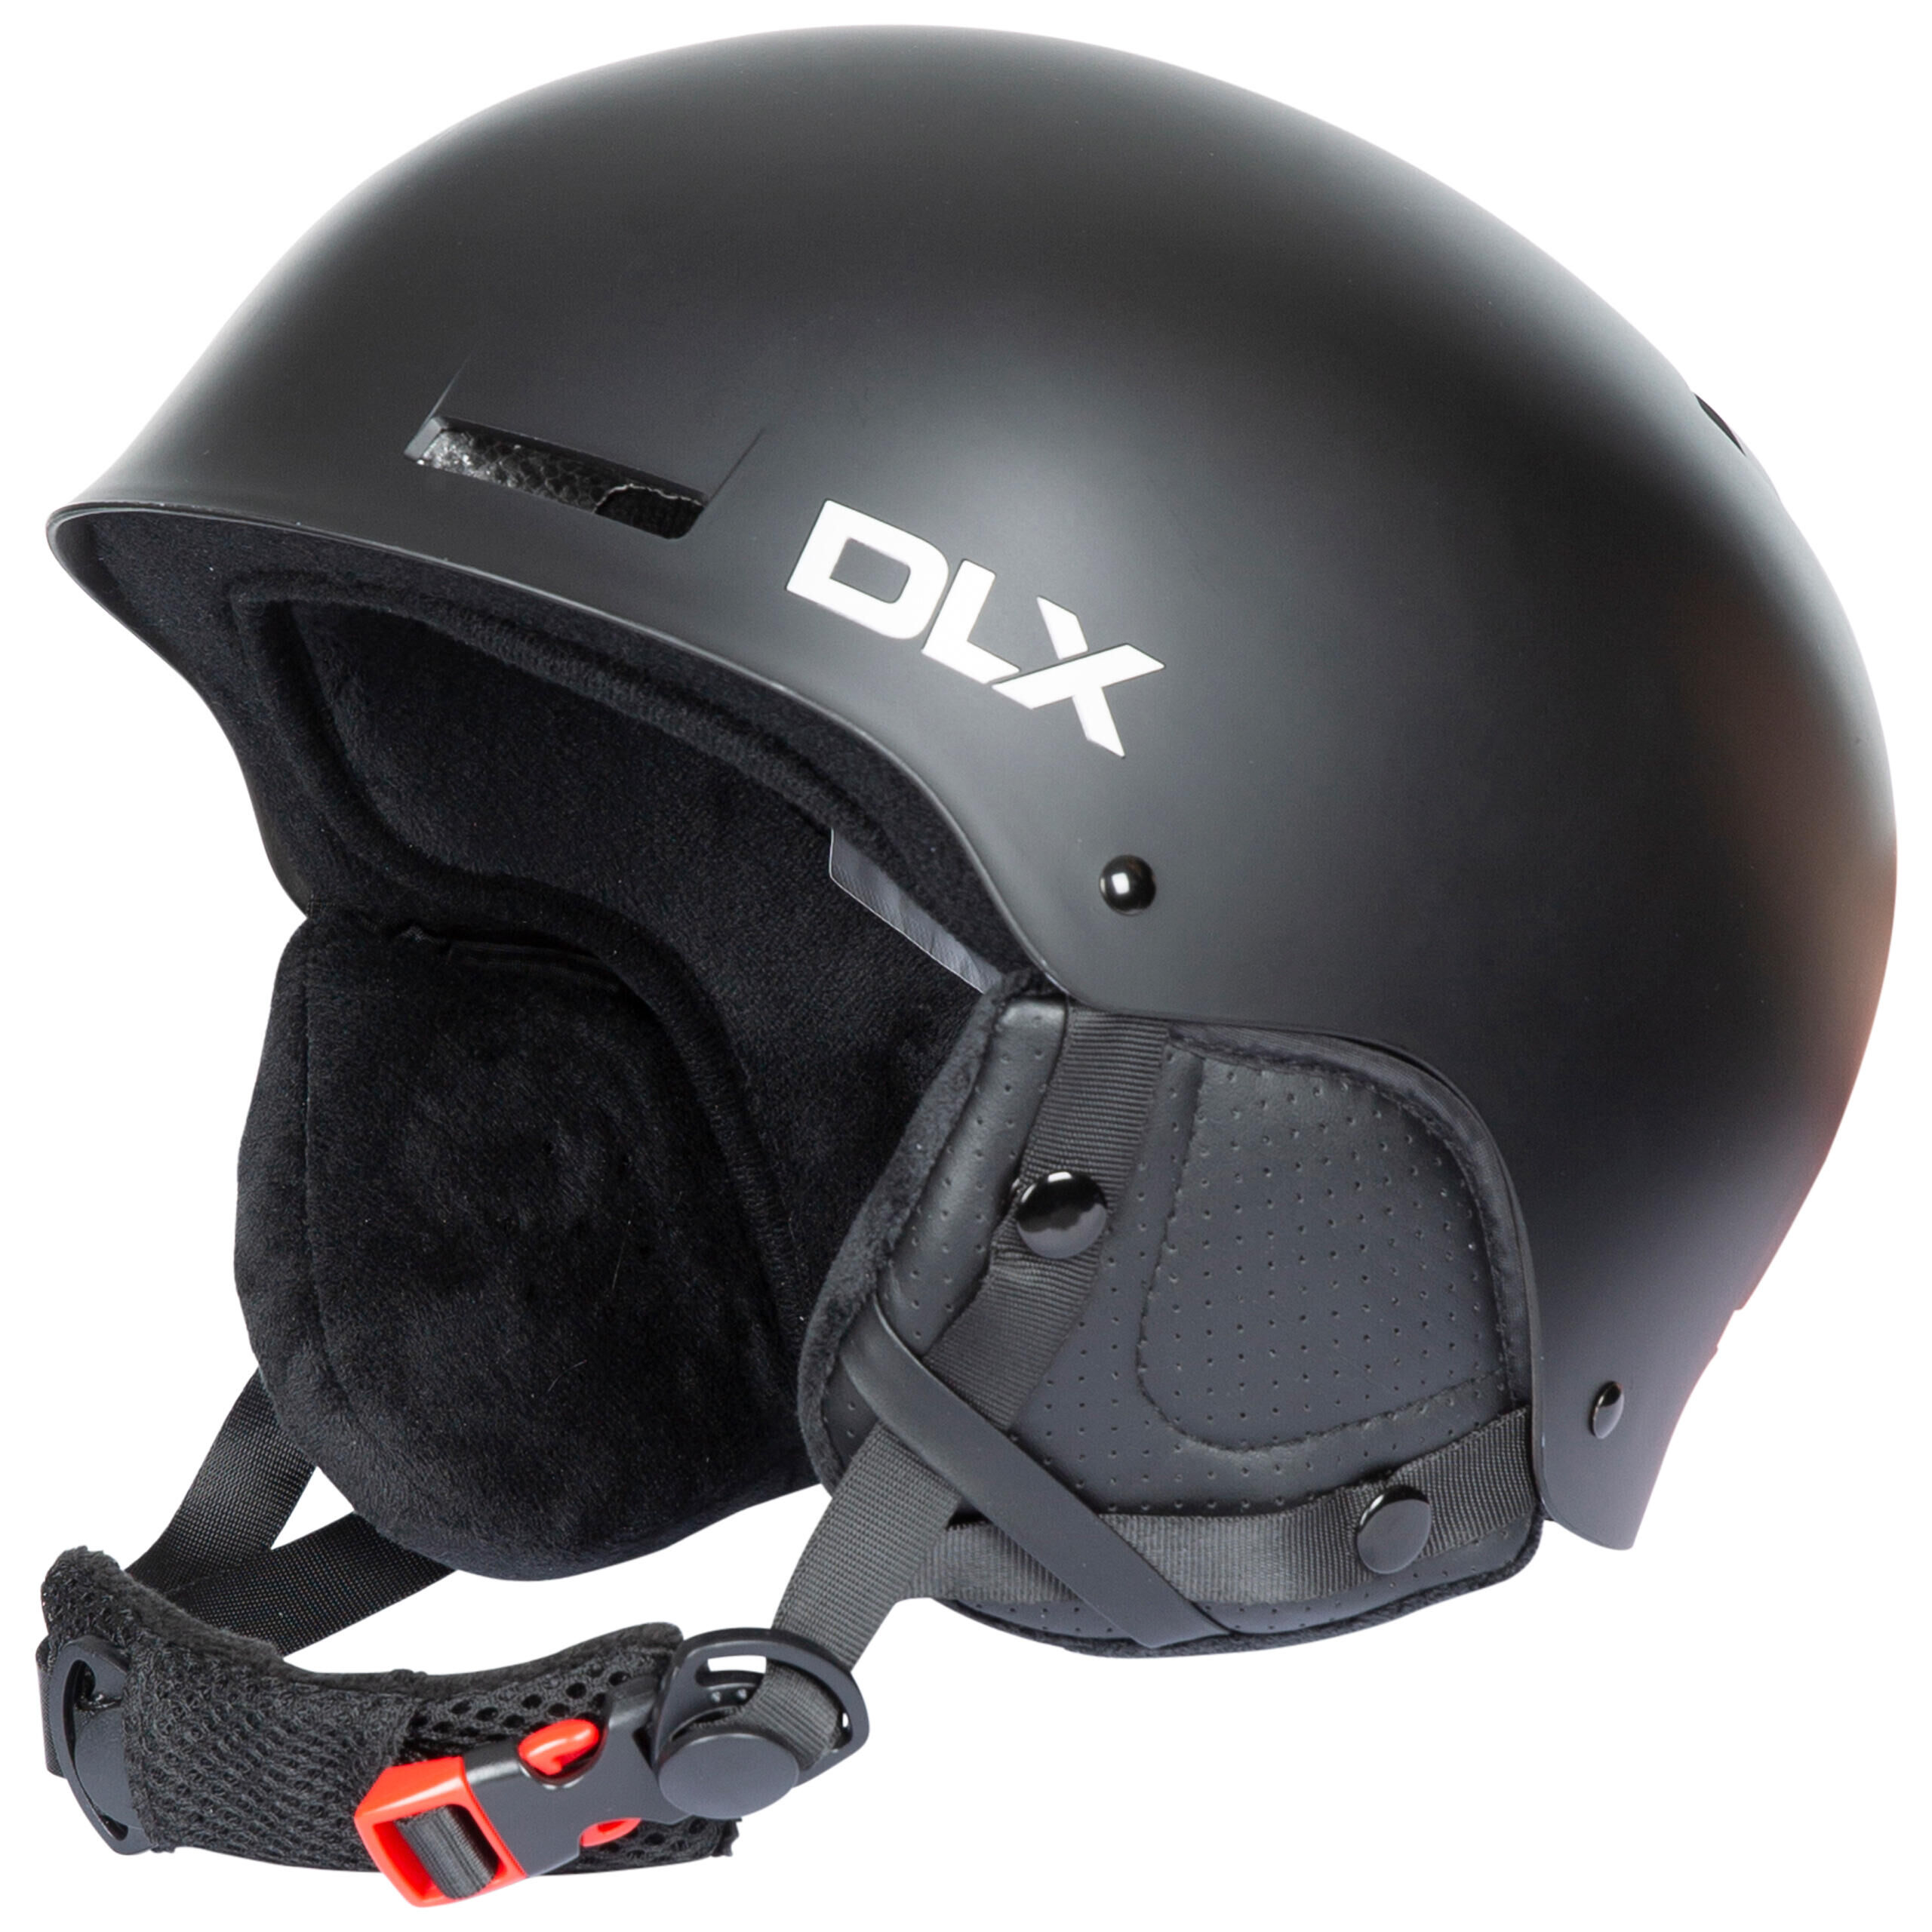 DLX Adult Ski Helment with Goggle Retainer & Quick Release Buckle Russo